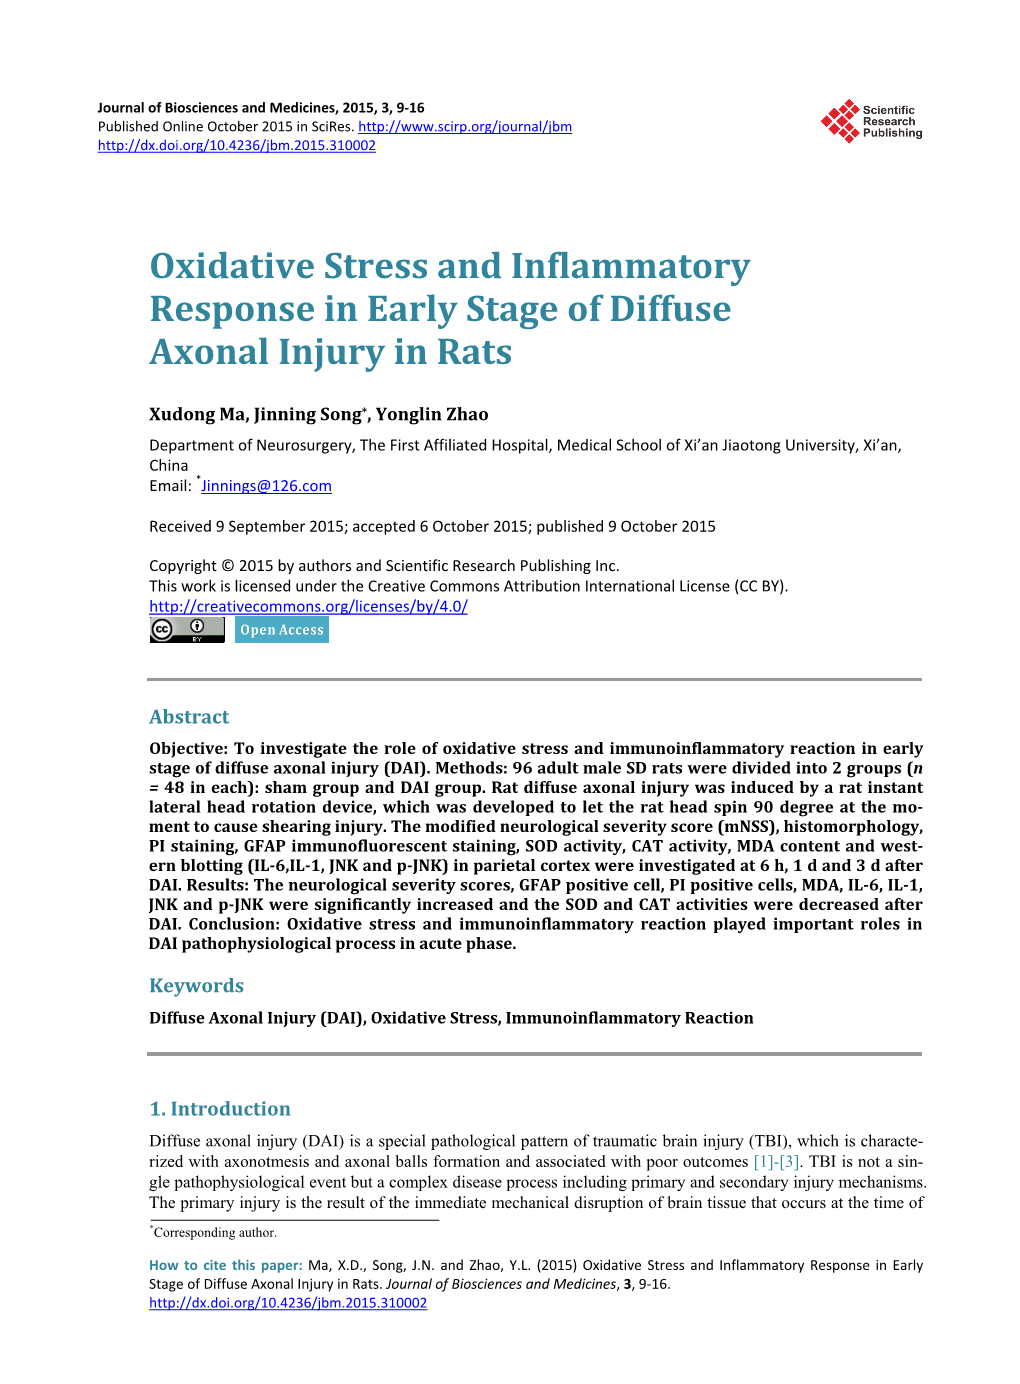 Oxidative Stress and Inflammatory Response in Early Stage of Diffuse Axonal Injury in Rats